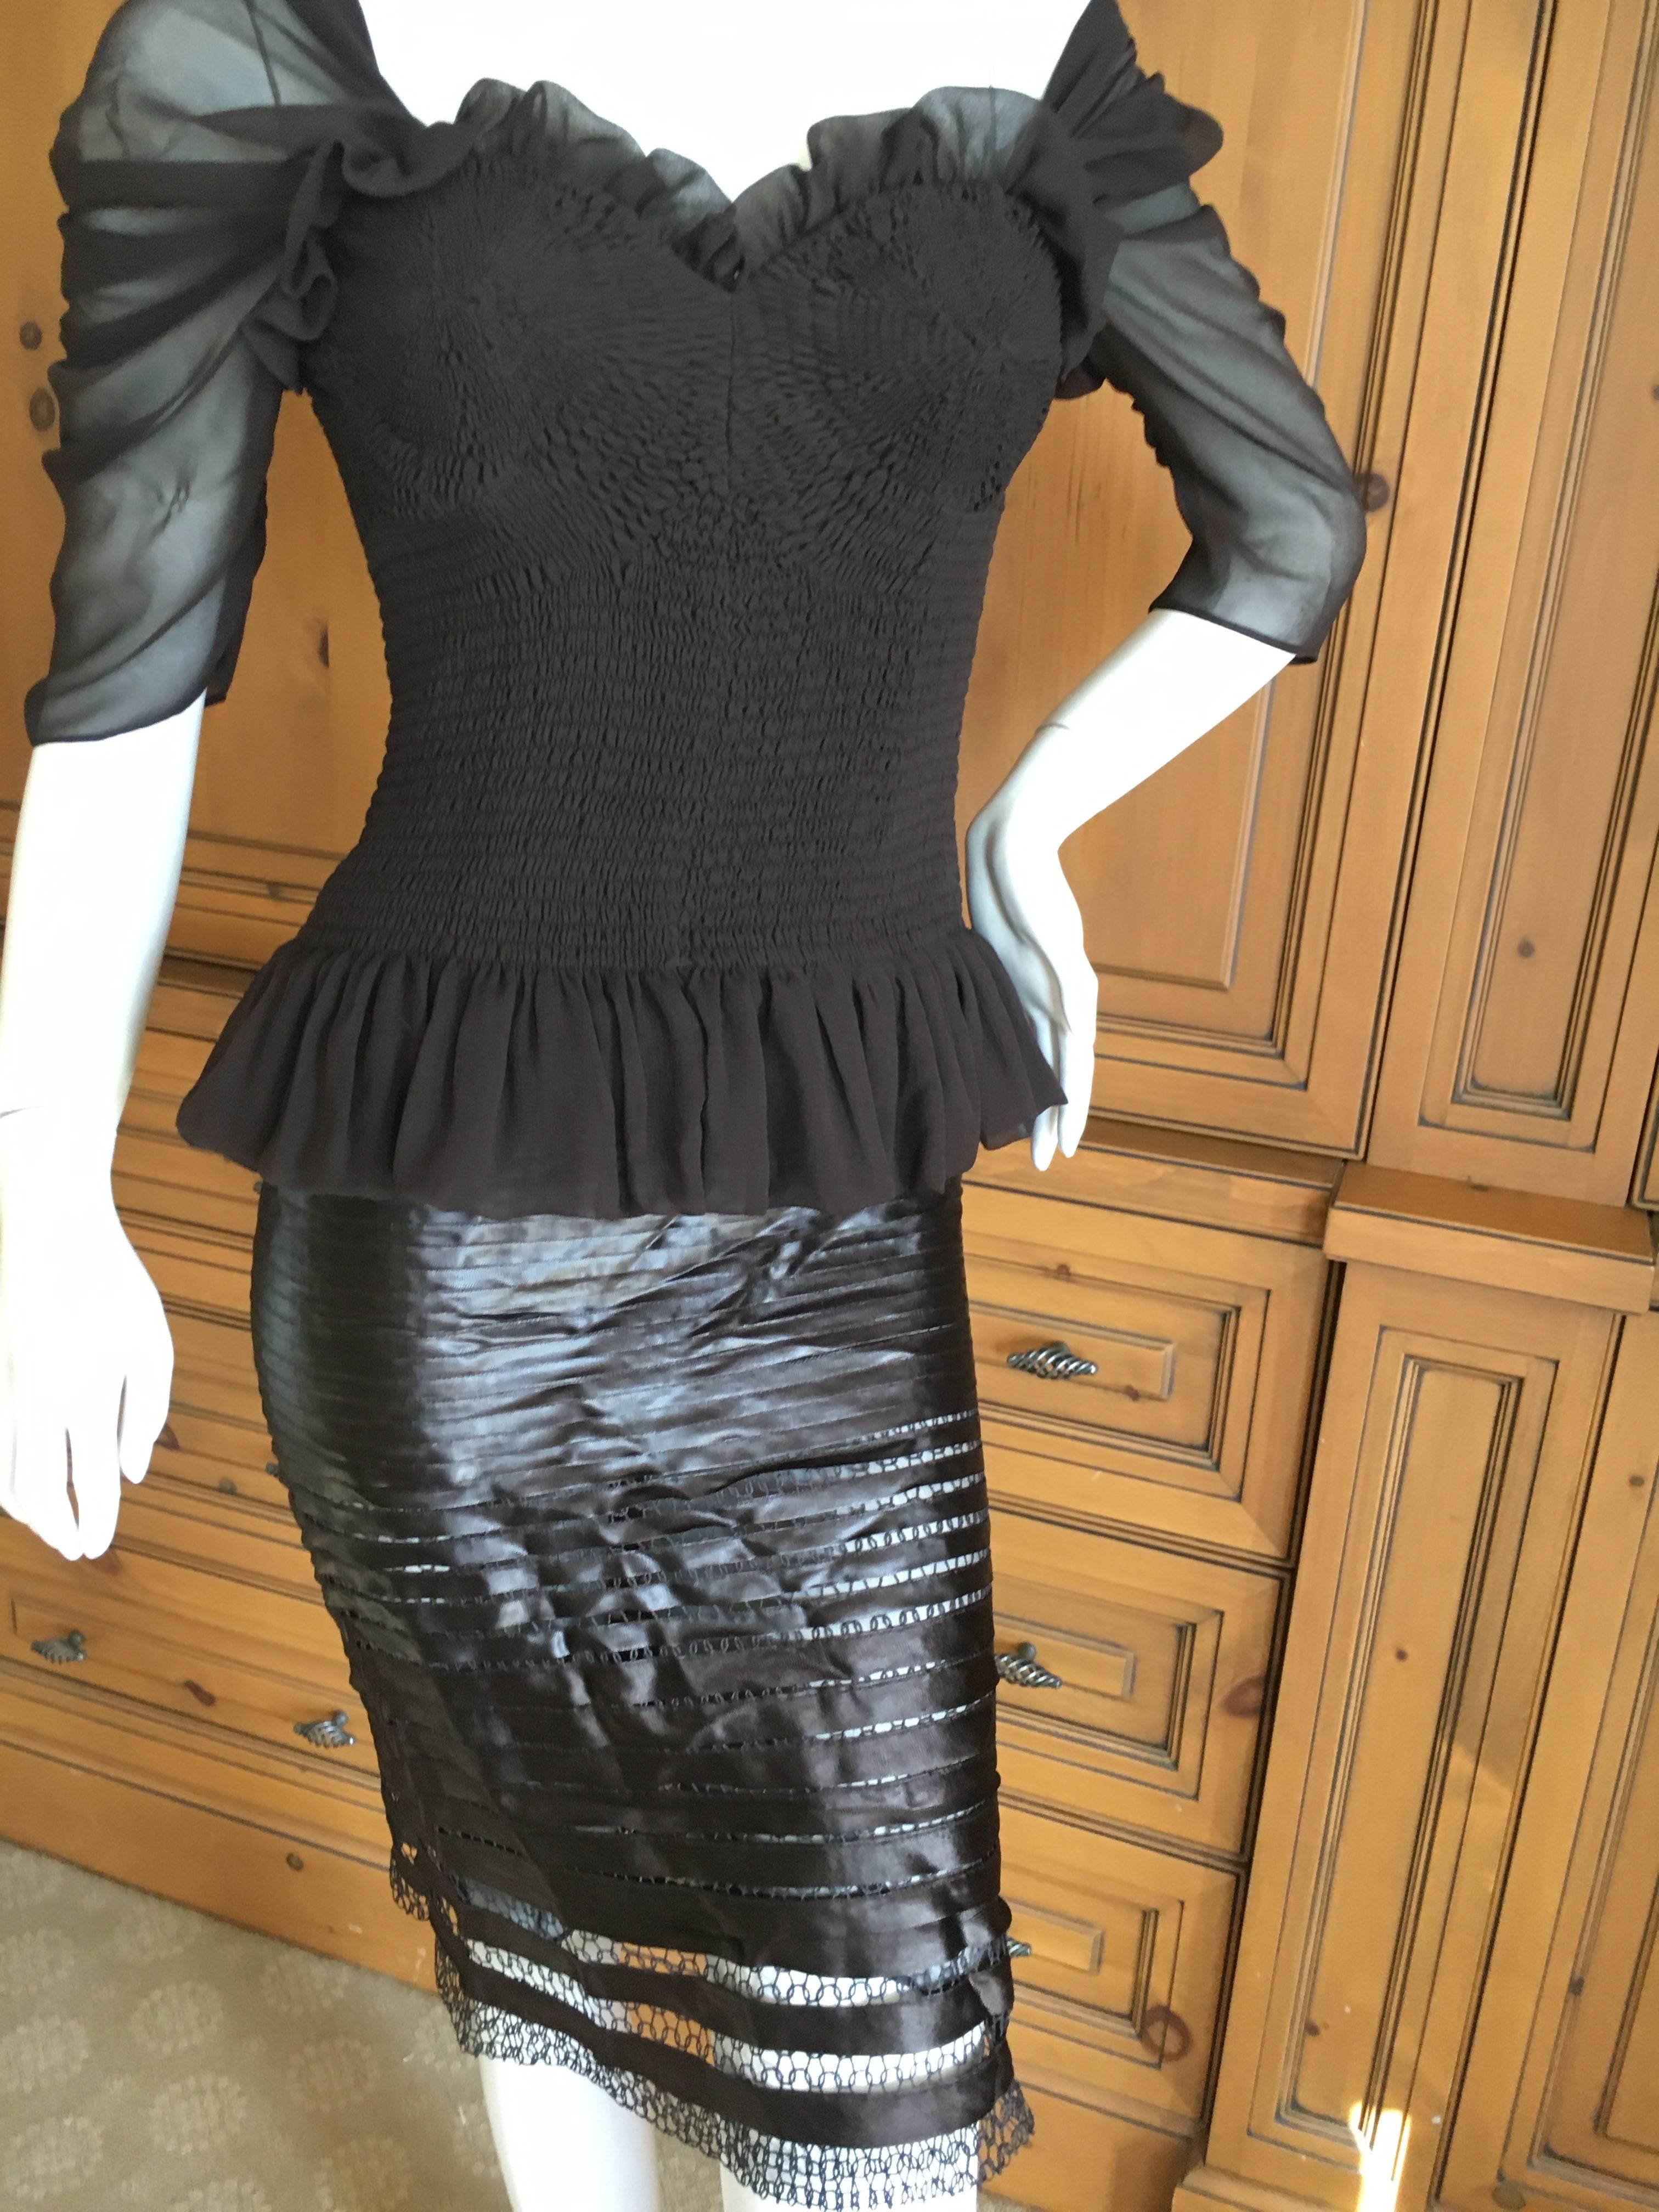 Wonderful skirt and top from Tom Ford.
The details are lovely, but hard to photograph.
Size 38
Bust 34